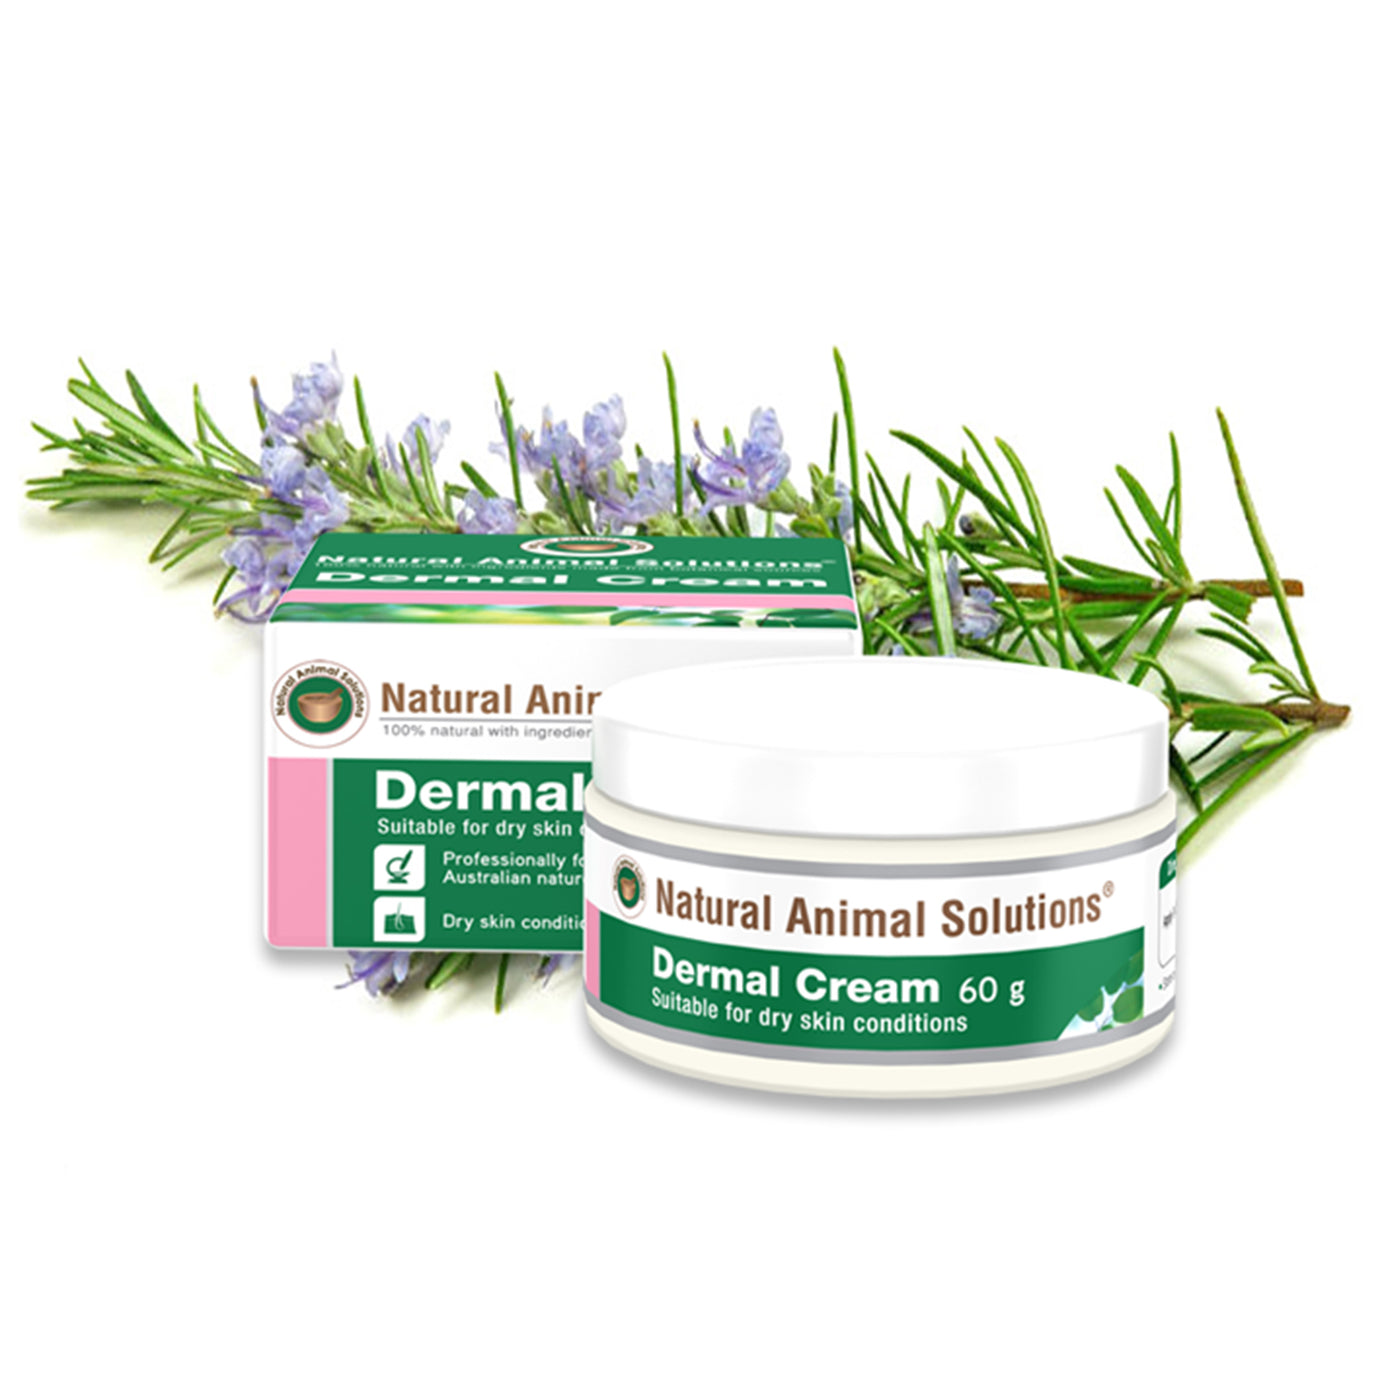 Natural Animal Solutions (NAS) Dermal Cream for dogs and cats 60g